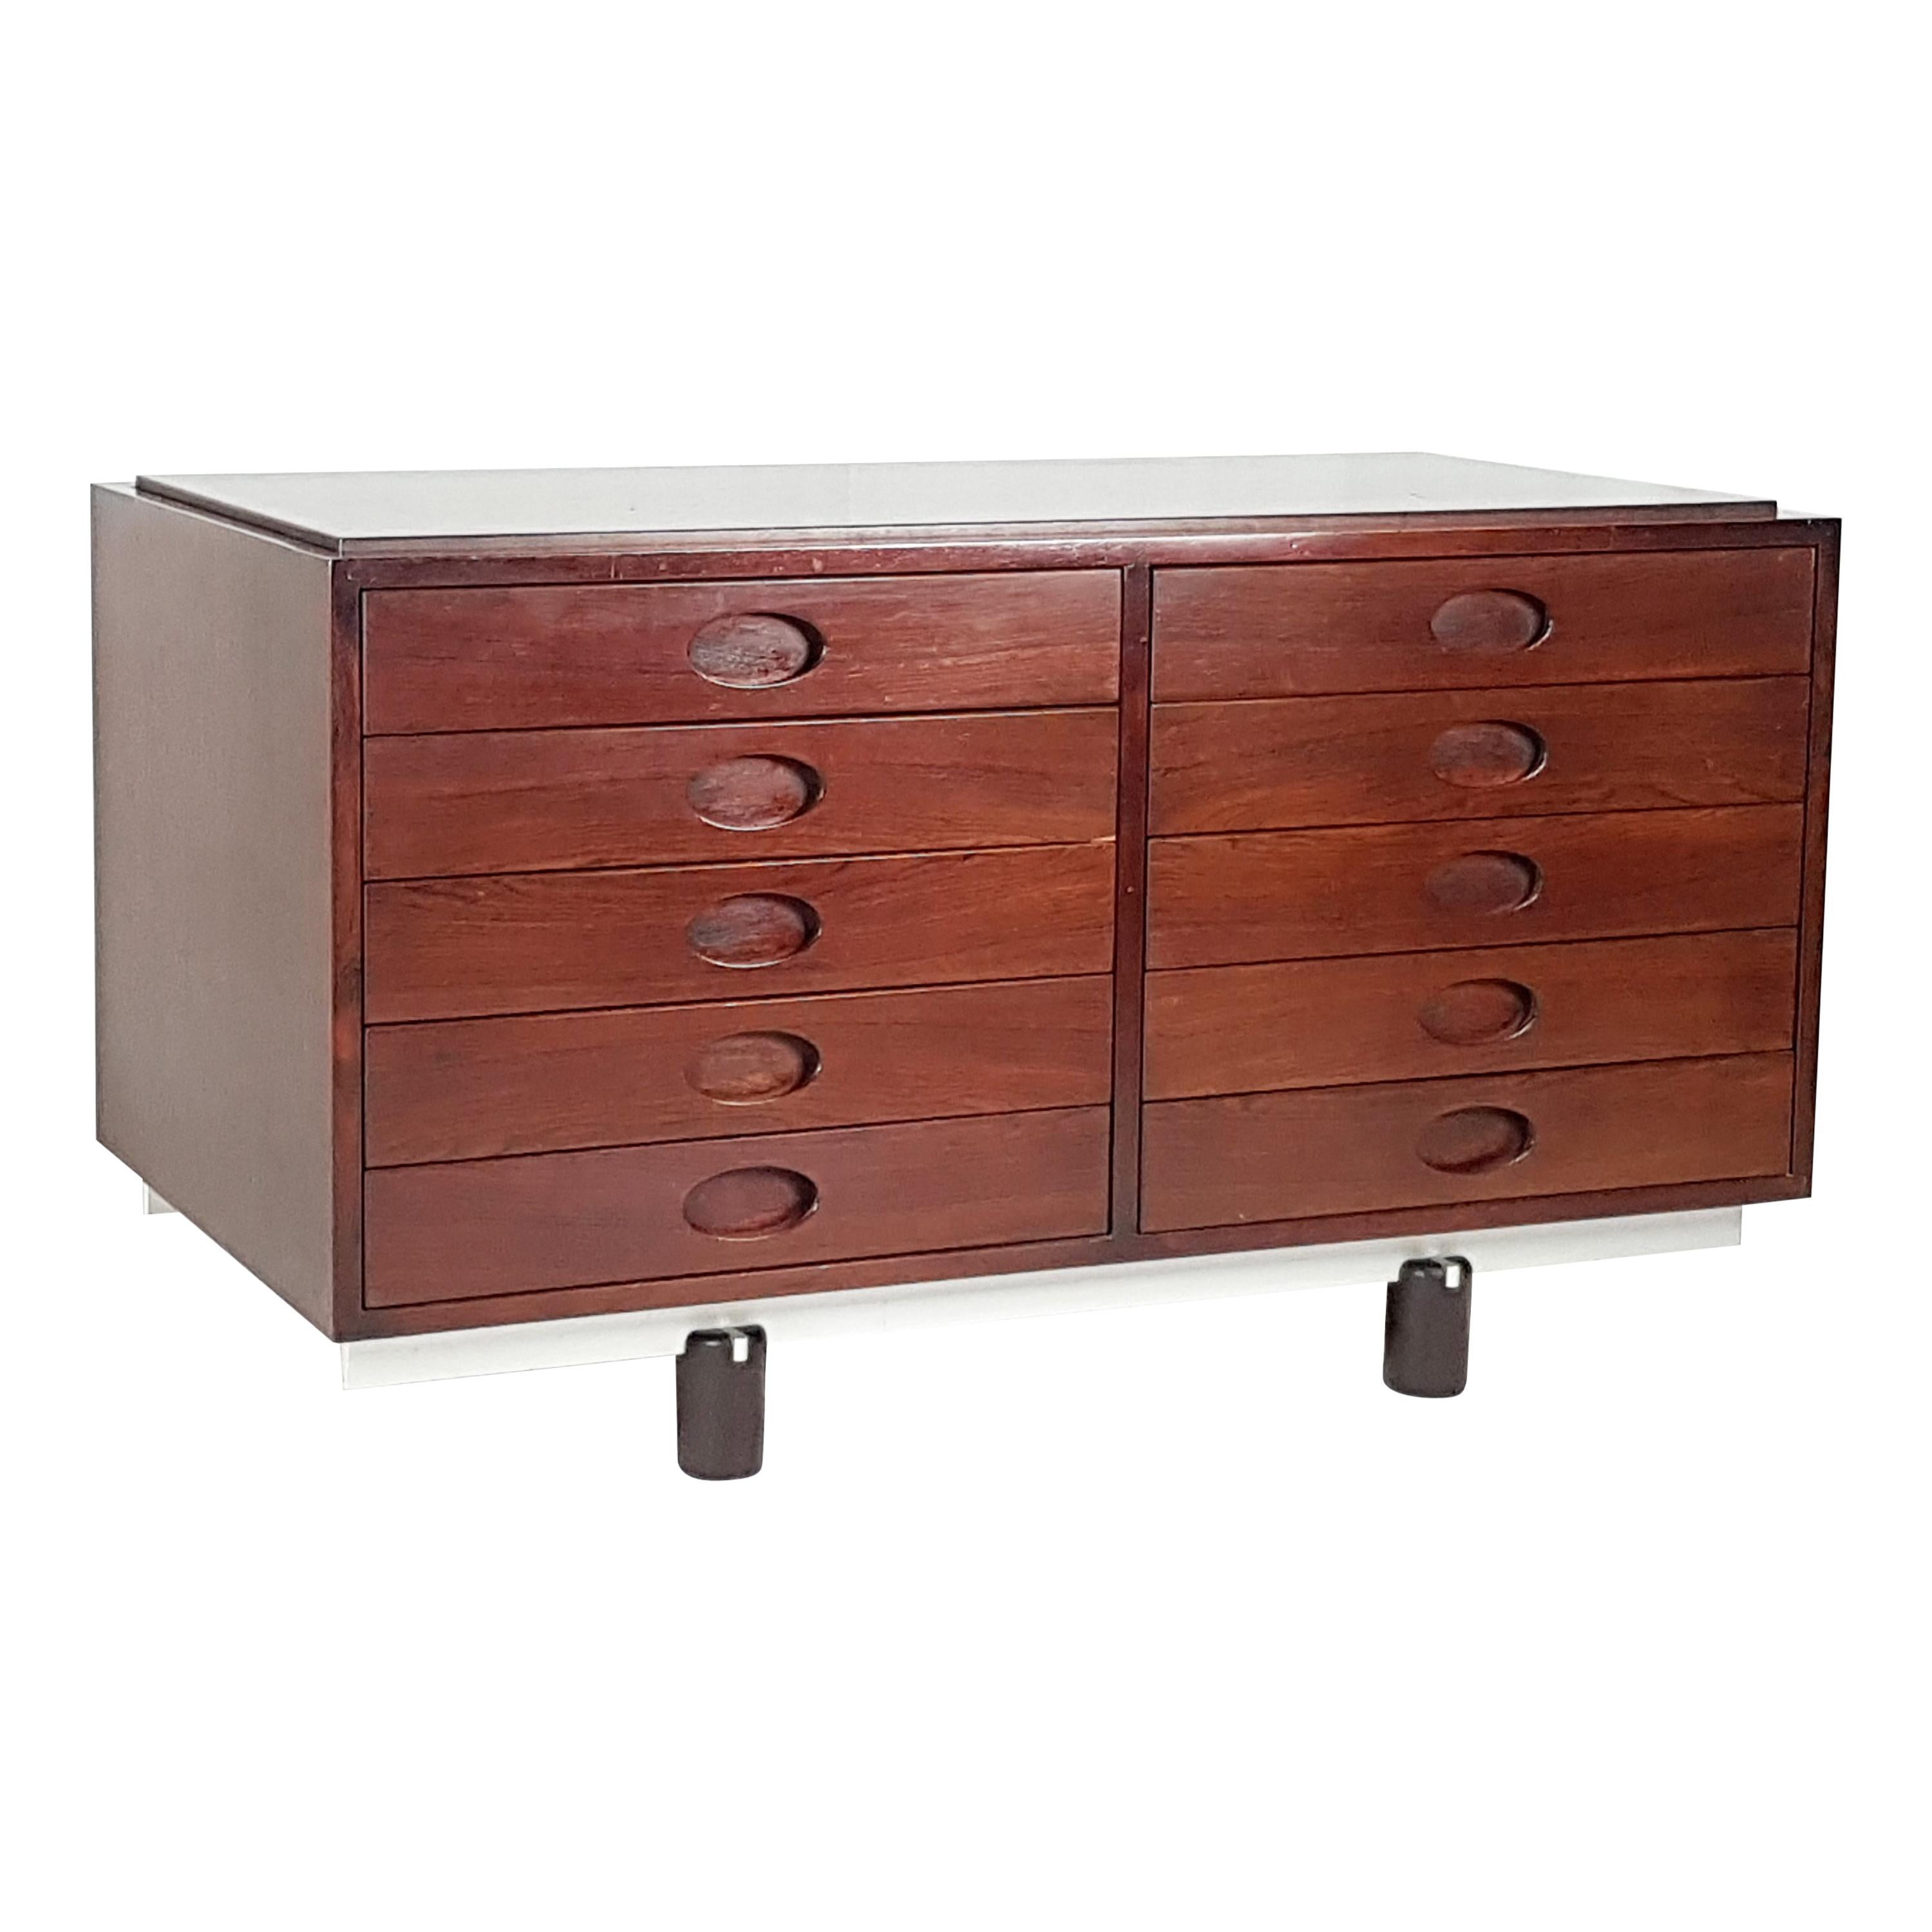 Rosewood and Aluminum 1960s Chest of Drawers by Gianfranco Frattini for Bernini